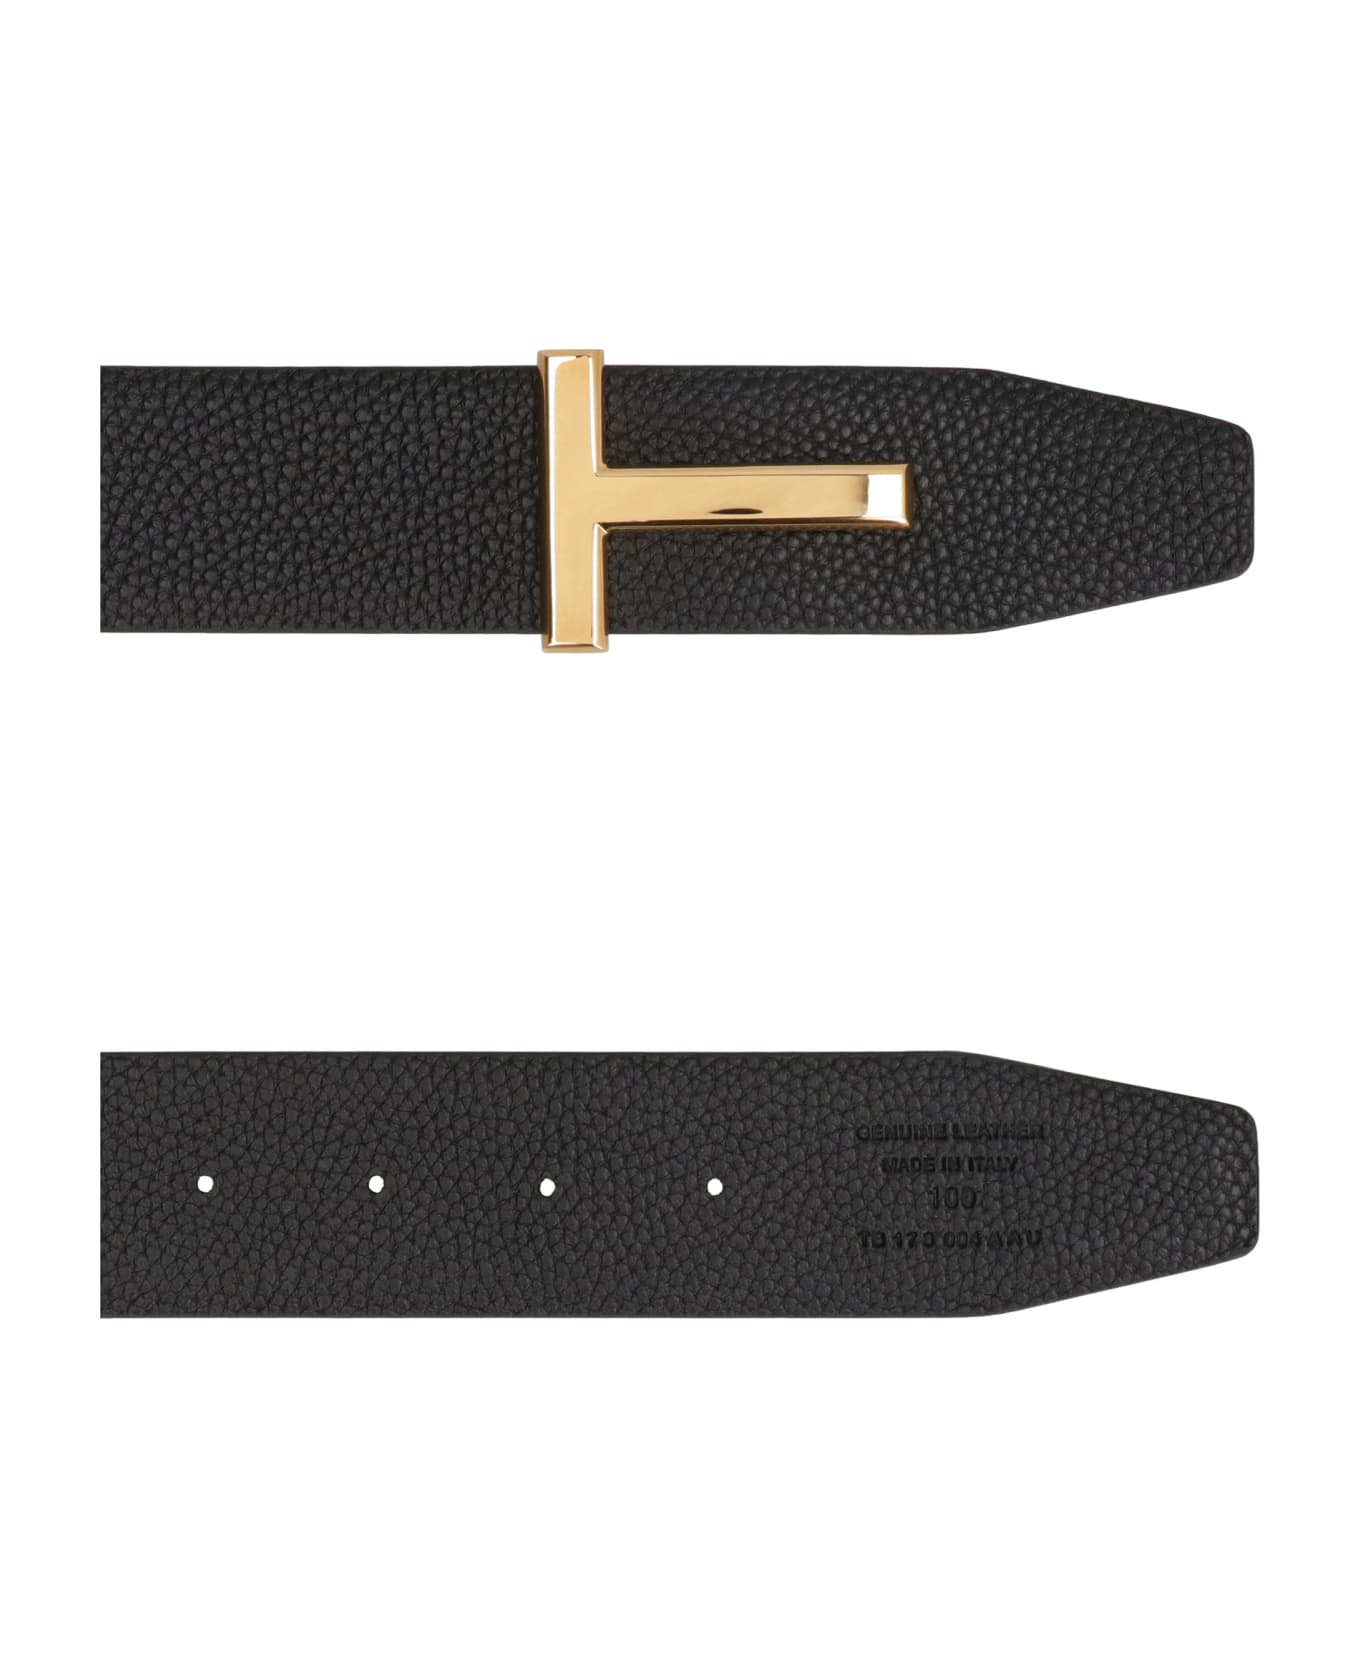 Tom Ford Reversible Leather Belt - brown ベルト